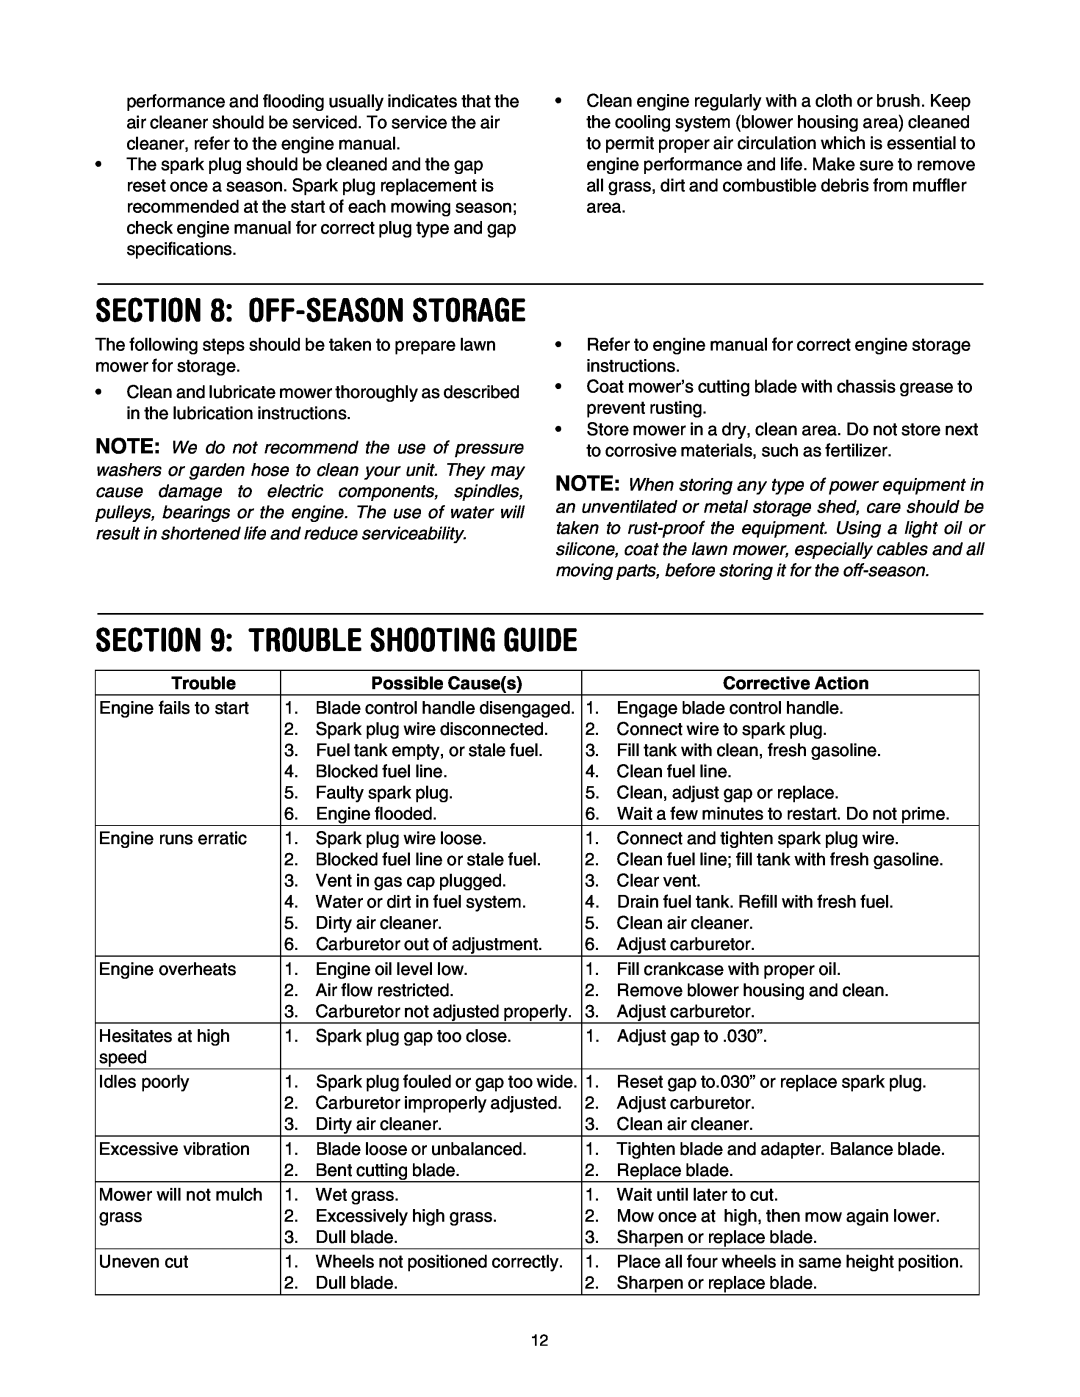 Troy-Bilt TRU CUT 100 manual Trouble Shooting Guide, Off-Season Storage, Possible Causes, Corrective Action 